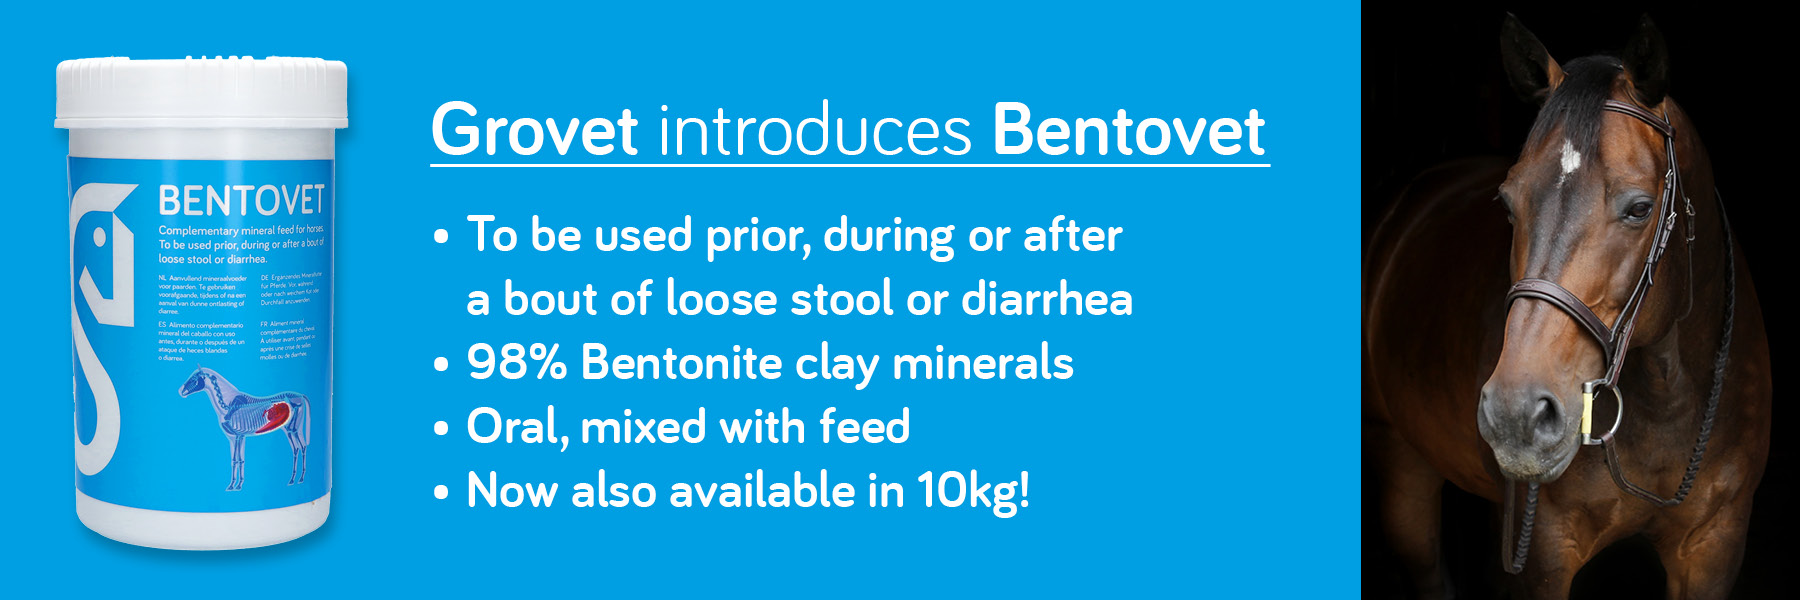 Bentovet, to be used prior, during or after a bout of loose stool or diarrhea